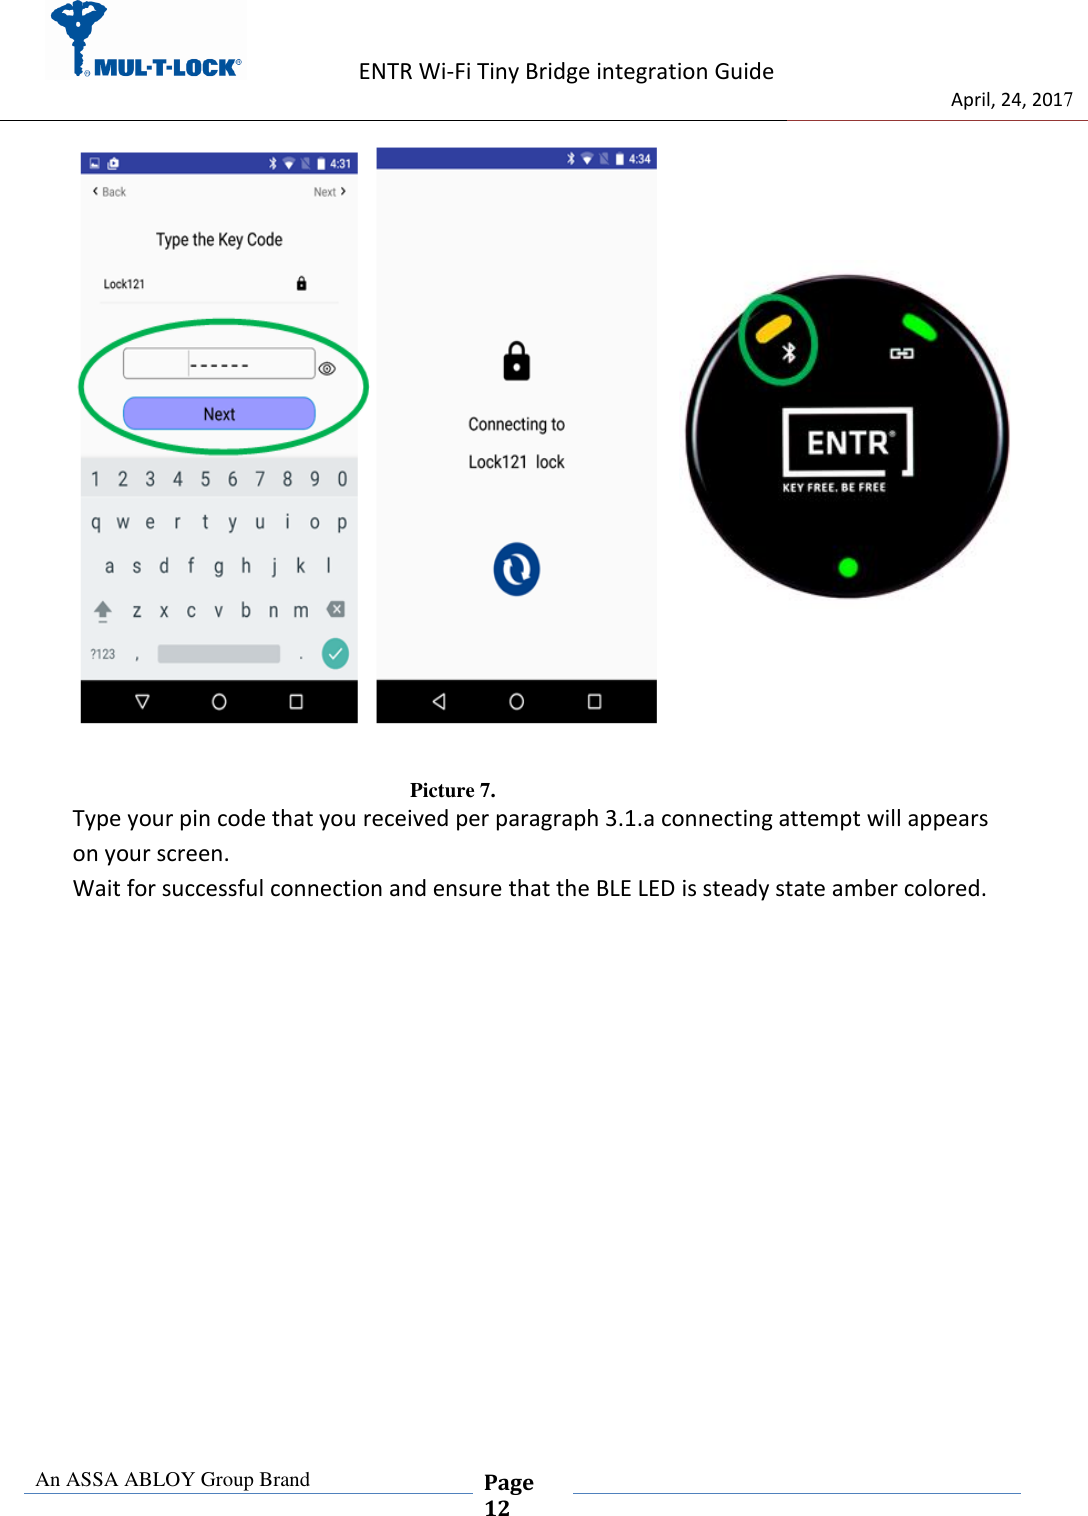                   ENTR Wi-Fi Tiny Bridge integration Guide     de                                 April, 24, 2017  An ASSA ABLOY Group Brand  Page 12                        Picture 7. Type your pin code that you received per paragraph 3.1.a connecting attempt will appears on your screen. Wait for successful connection and ensure that the BLE LED is steady state amber colored. 